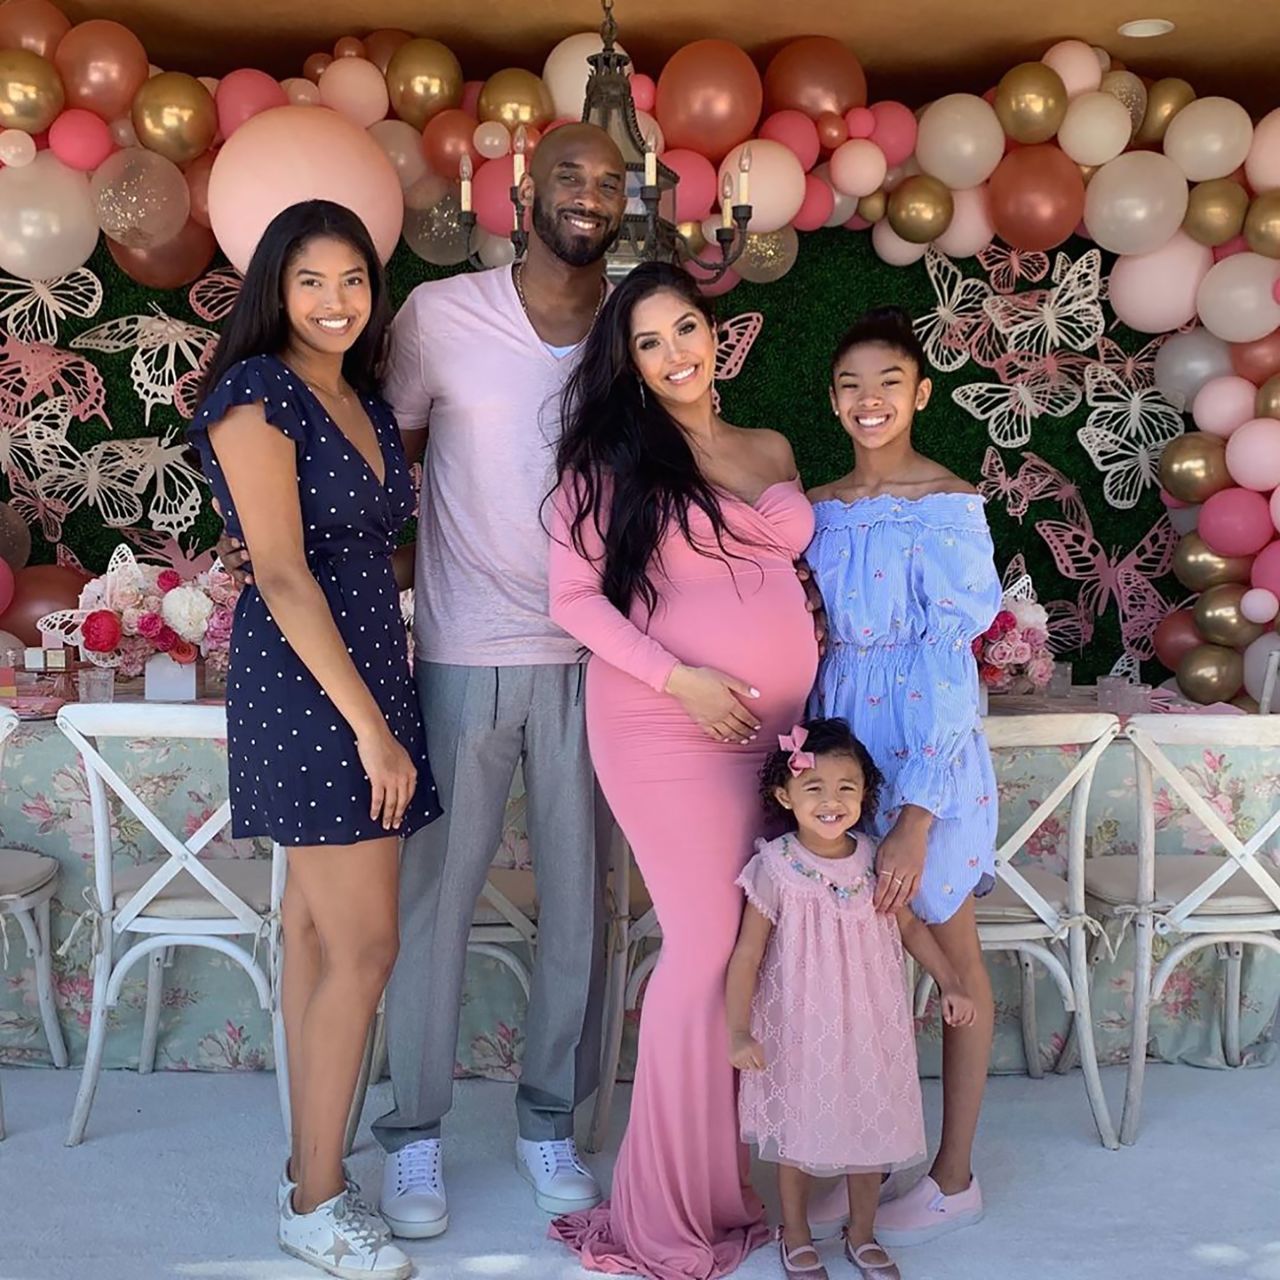 Bryant <a href="https://www.instagram.com/p/BxYER-JngPv/" target="_blank" target="_blank">posted this photo to Instagram</a> on Mother's Day in 2019. He and his wife, Vanessa, had four daughters: Natalia, Gianna, Bianka and Capri, who was born in June. "Happy Mother's Day @vanessabryant," Bryant wrote. "We love you and thank you for all that you do for our family. You are the foundation of all that we hold dear. I love you #mybaby #lioness #mamabear #queenmamba"